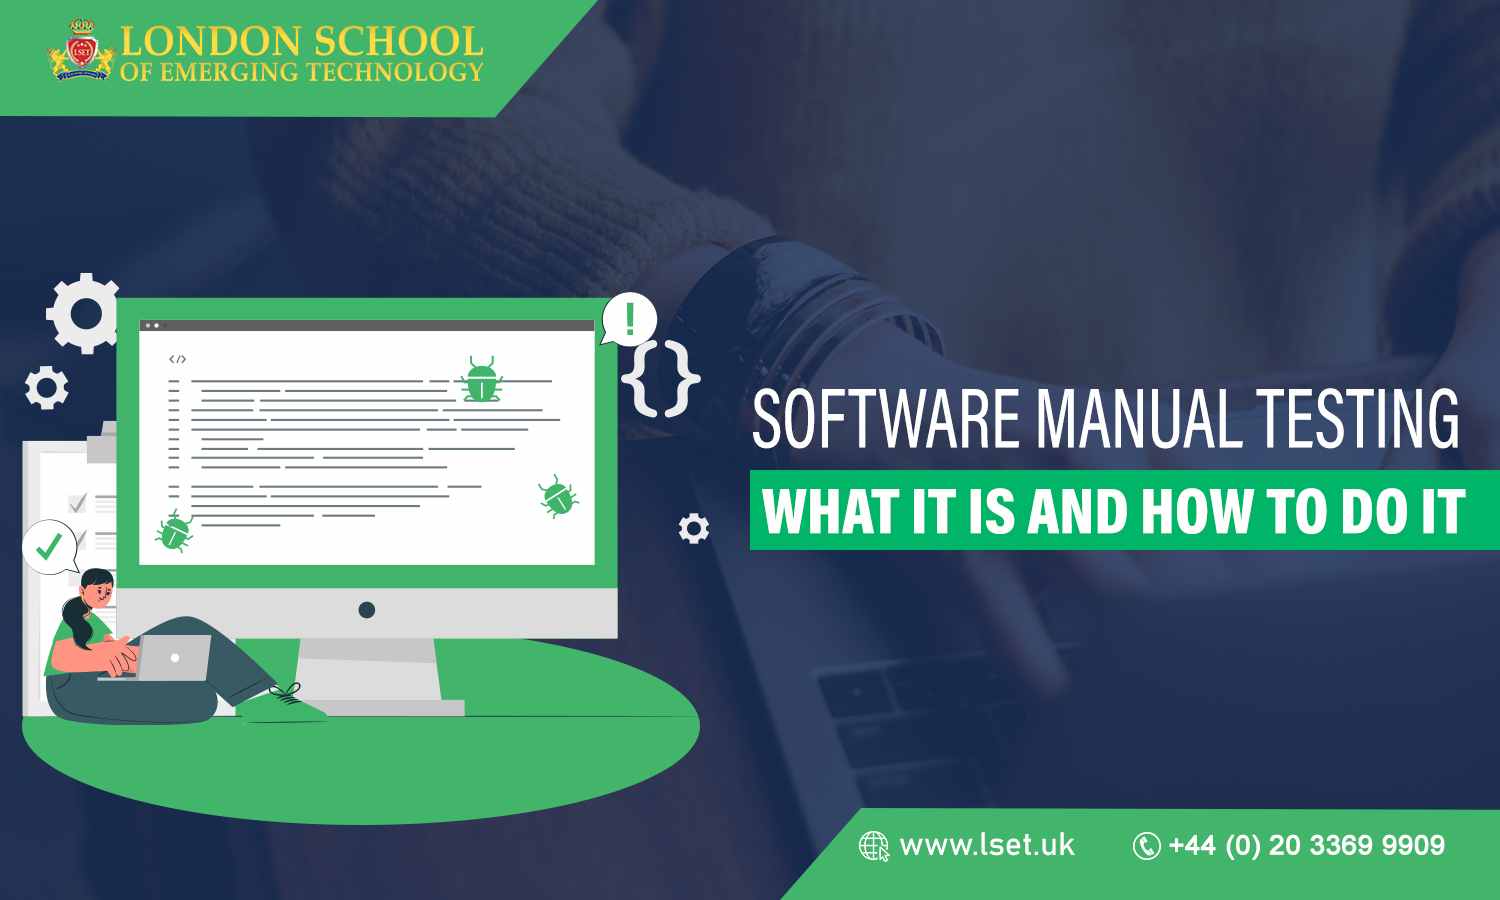 Software Manual Testing What It Is and How to Do It